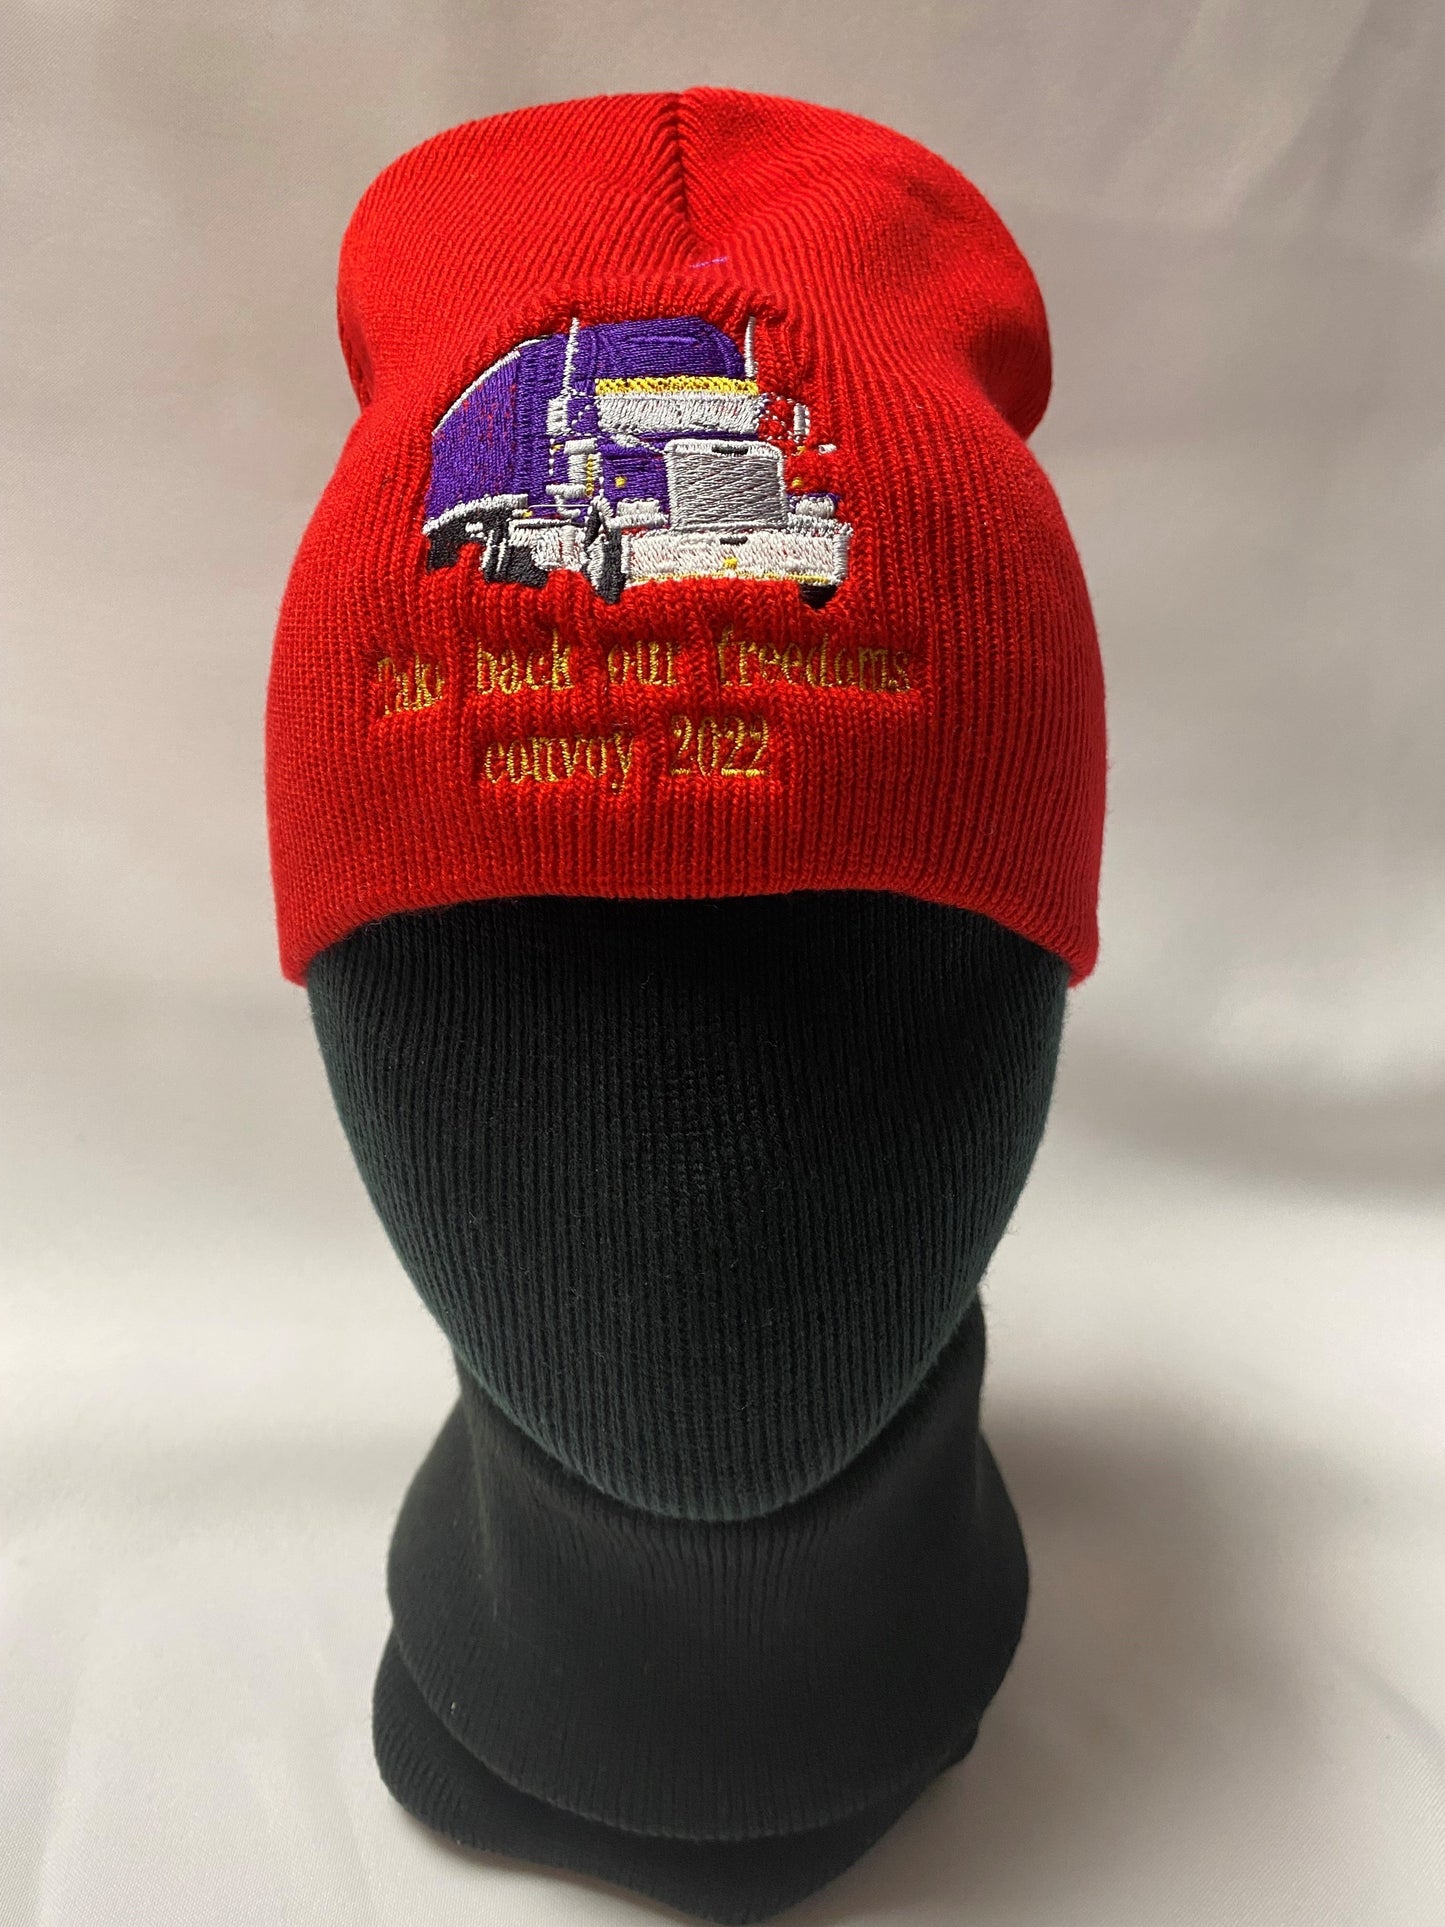 TRUCKER TOQUE red (no rim): "Take back our freedoms convoy 2022"